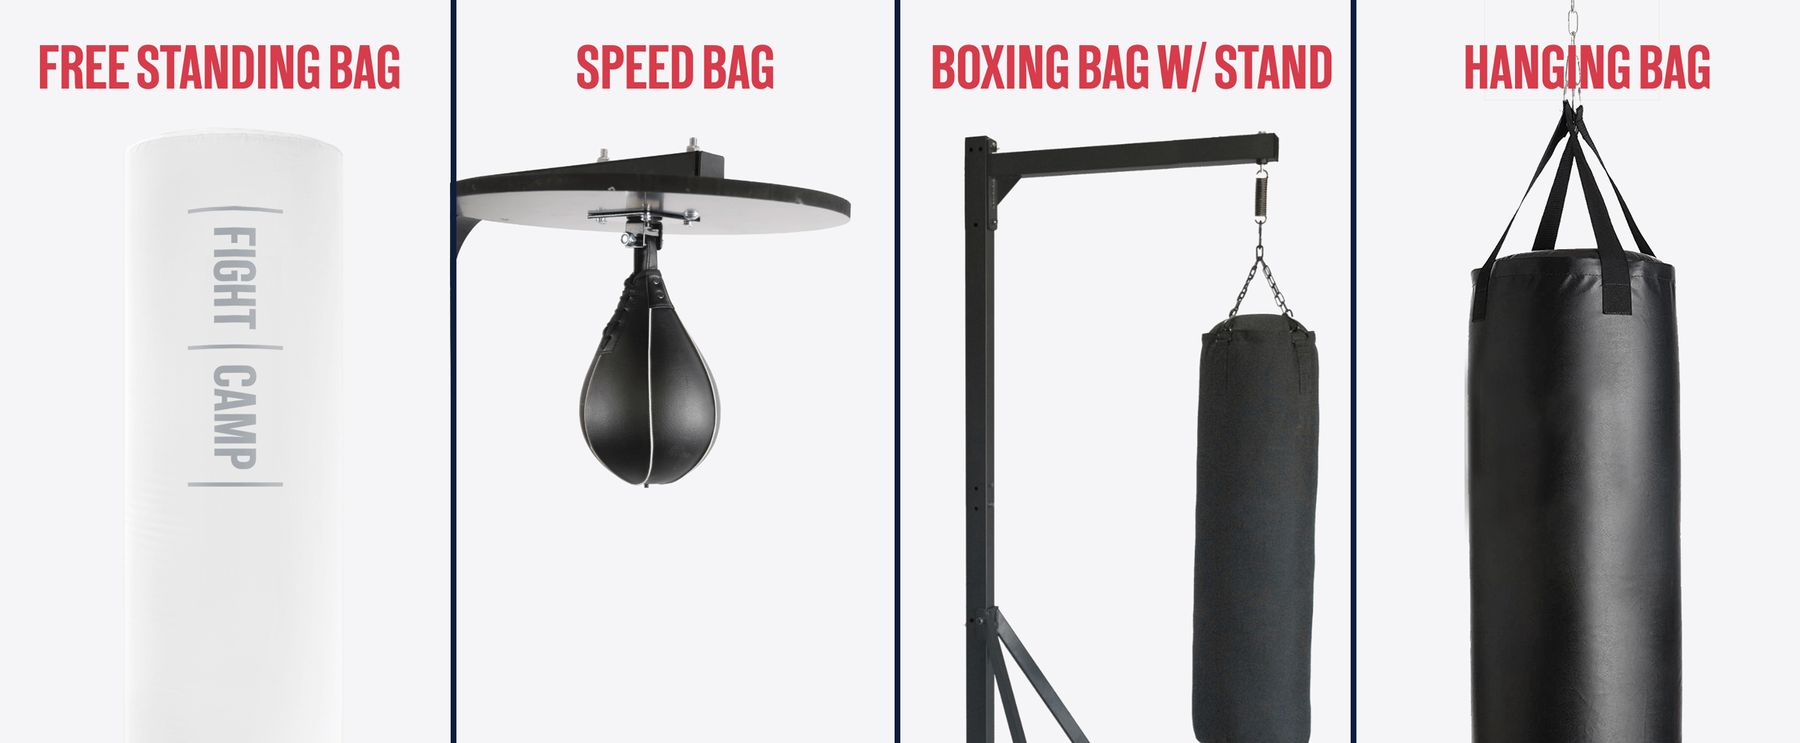 Punching Bag Wall Mount with Spring Punching Bag Reflex Speed Bag Wall Hanging Wall-Mounted Strong Durable Boxing Ball Relief Stress Exercise for Kids Adults Home Office Gym Men Women